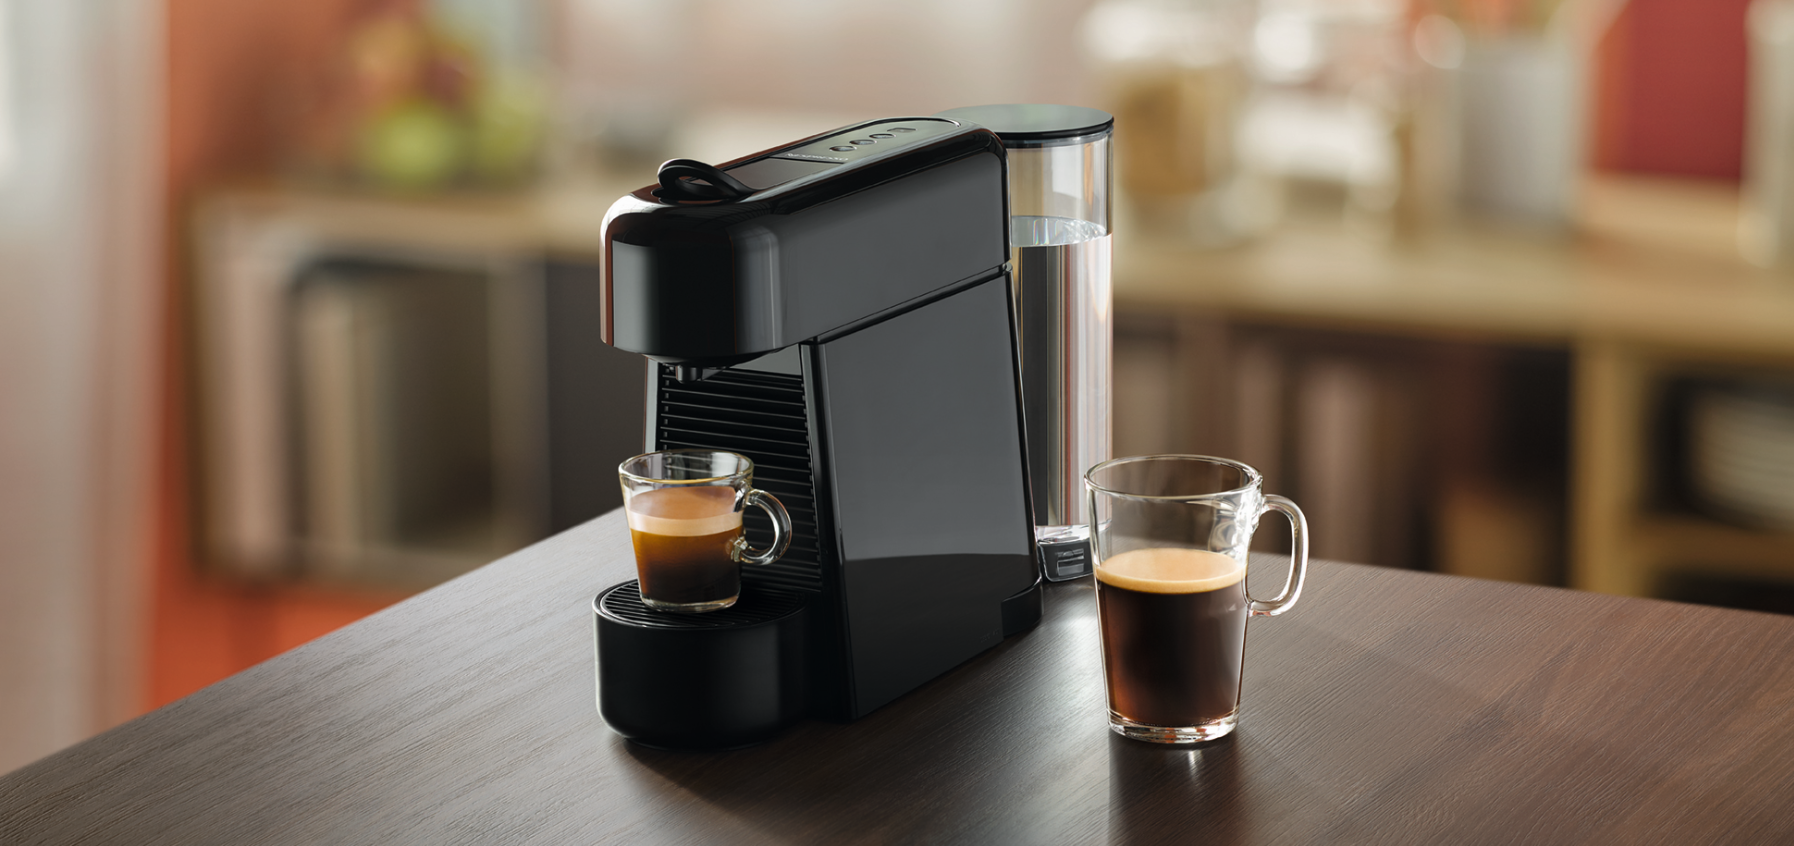 Nespresso Festive Sale is here! Enjoy up to 15% off selected coffee machines & accessories. - 1